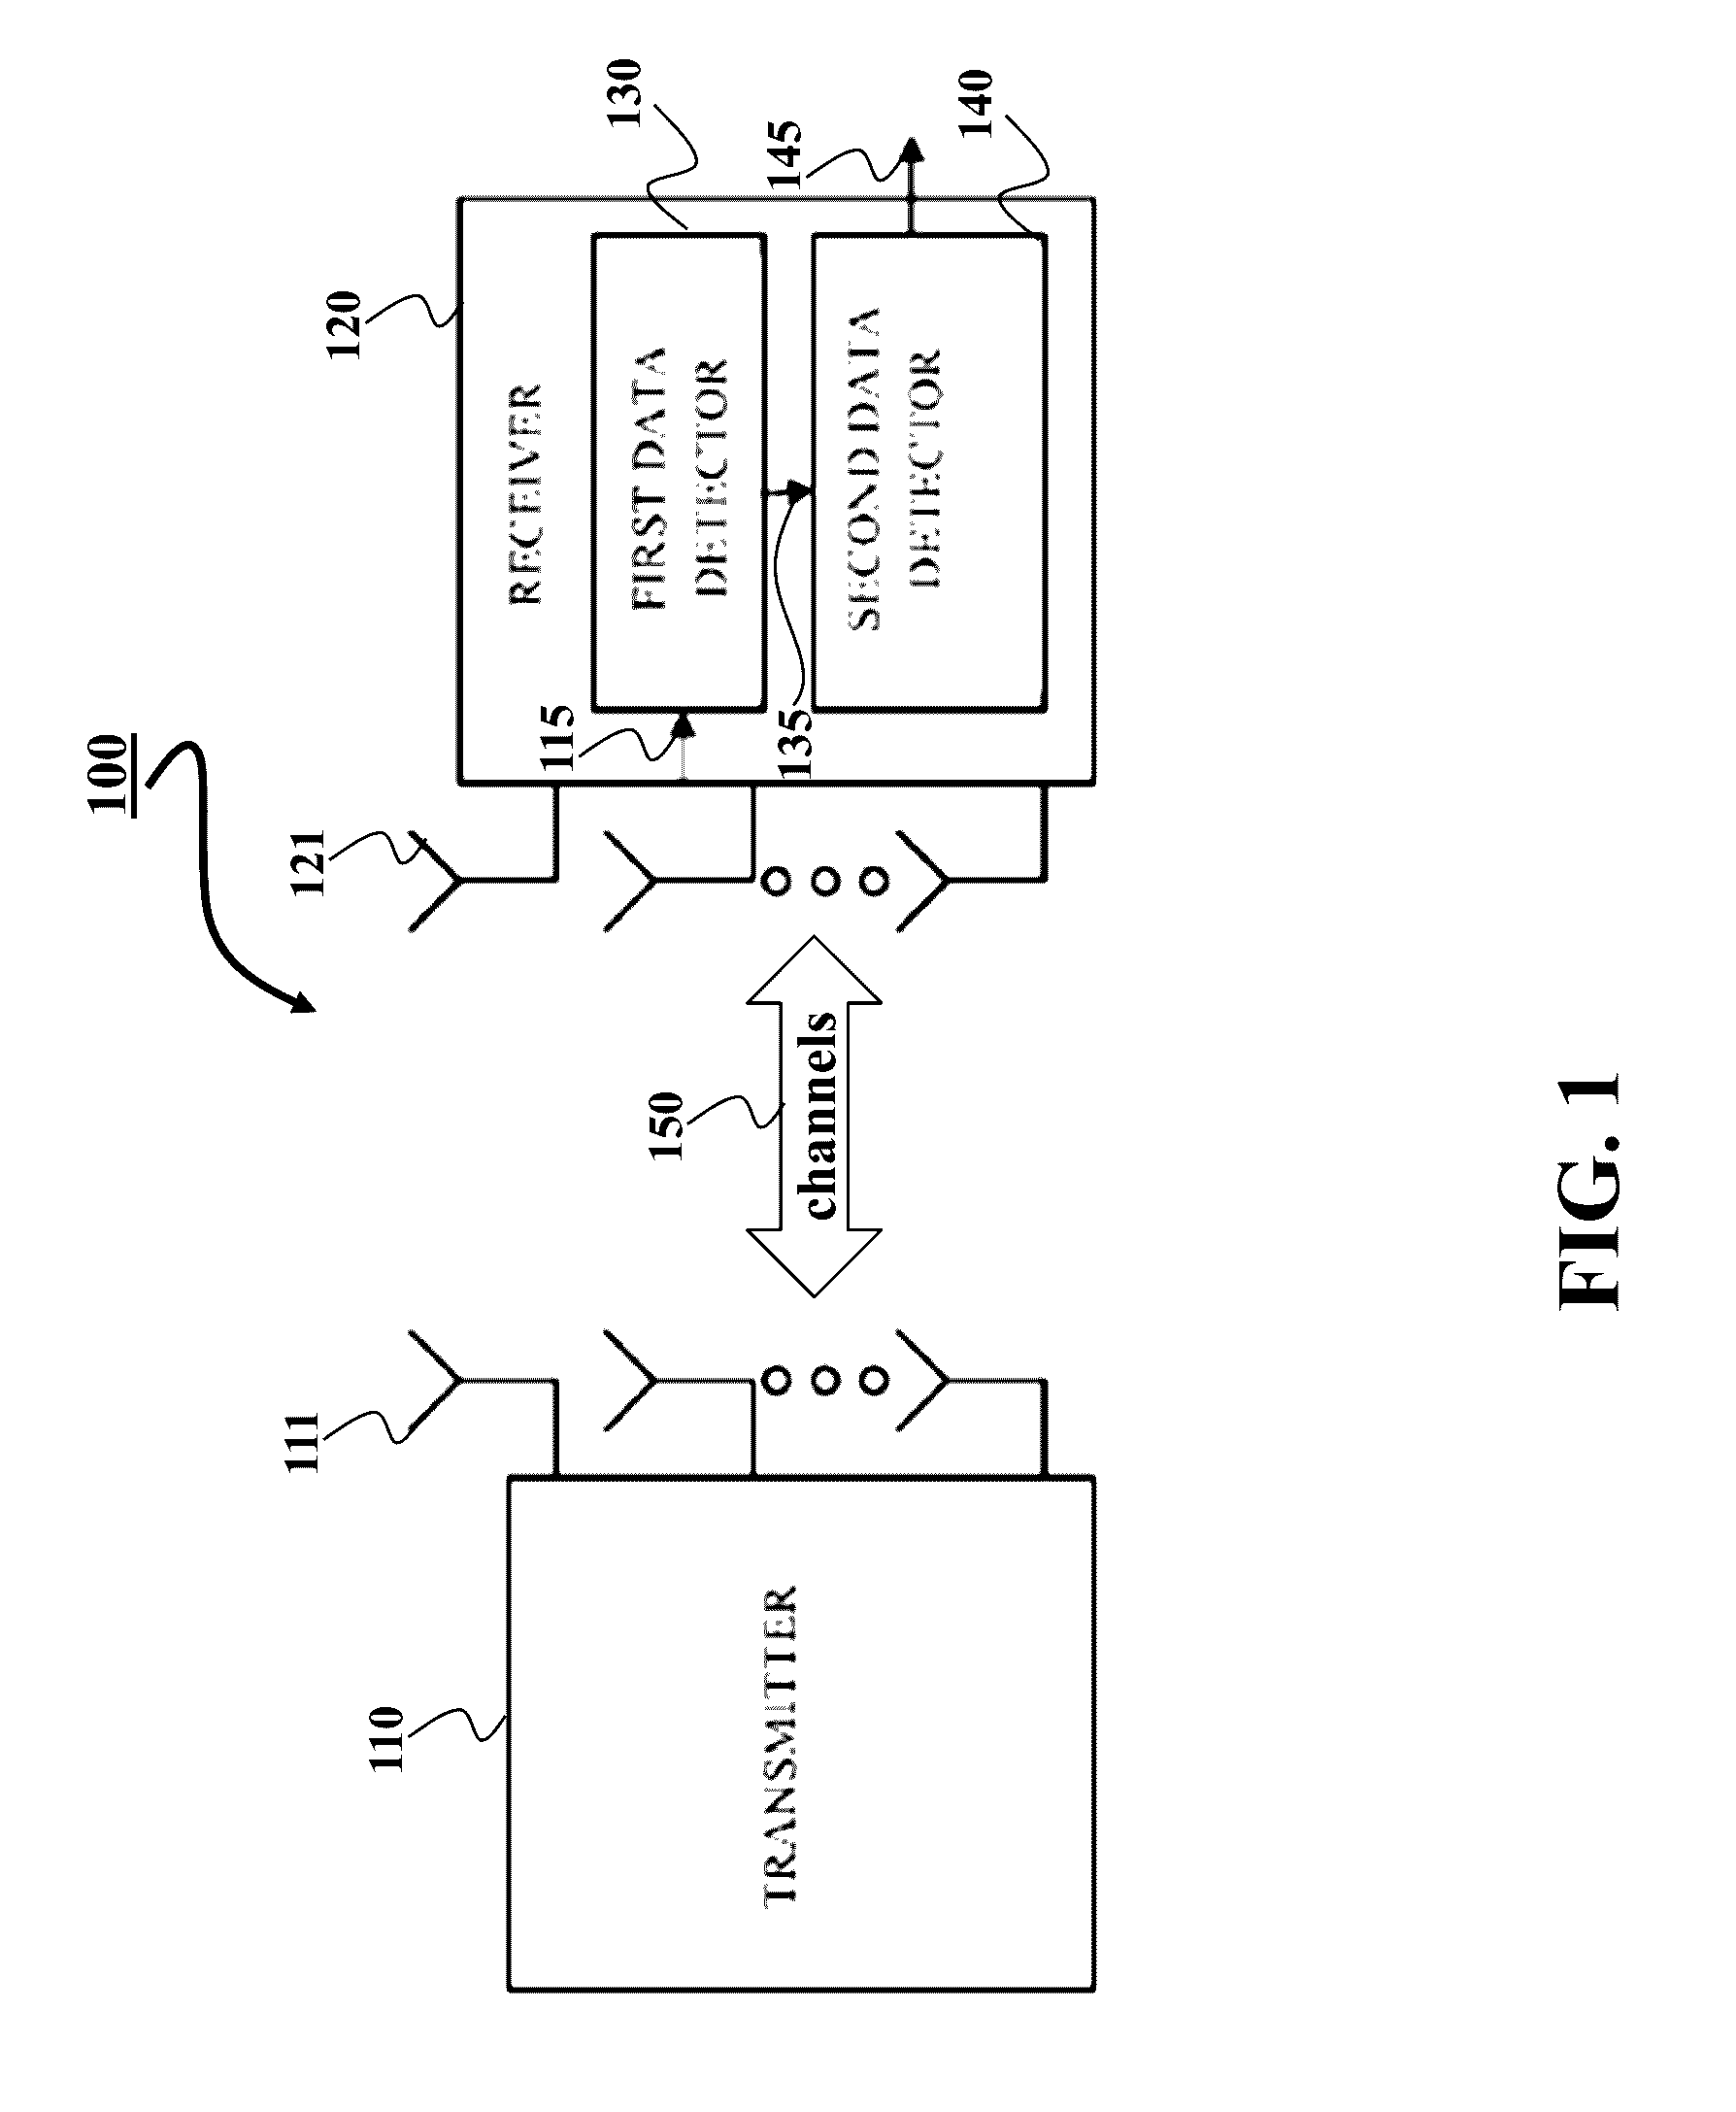 System and method for decoding block of data received over communication channel